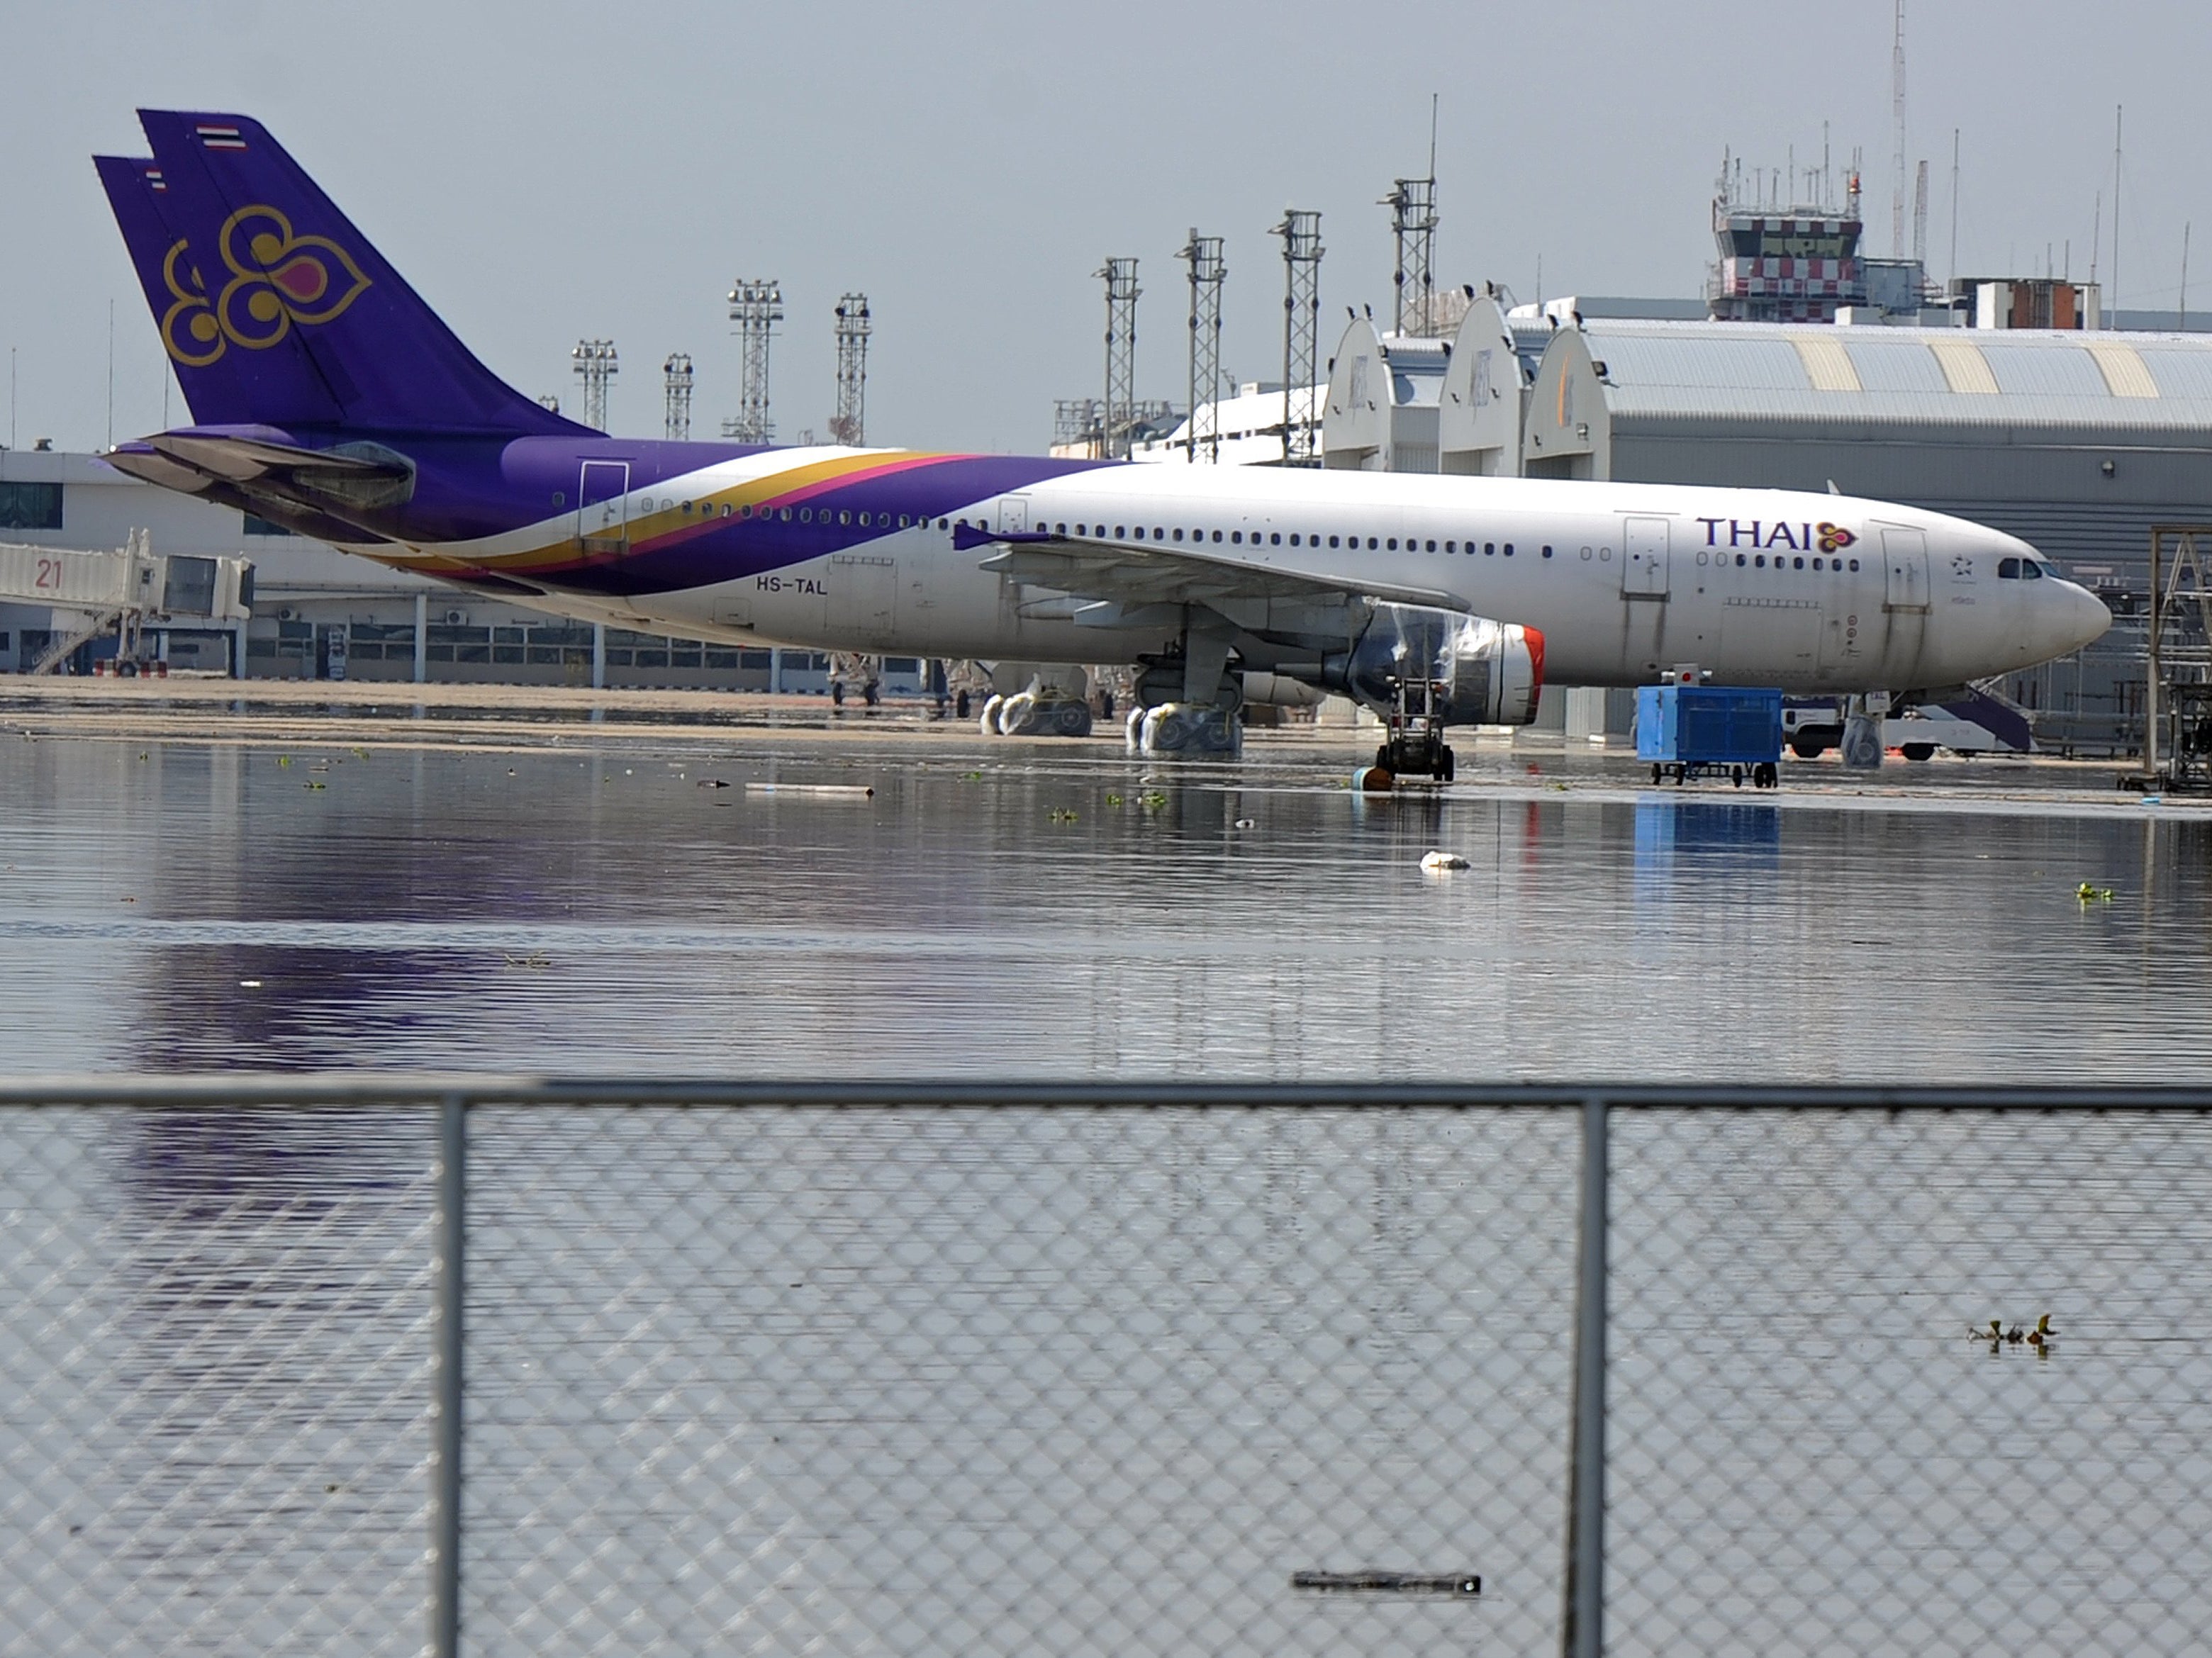 File image: Thai Airways had been suffering losses even before the pandemic began